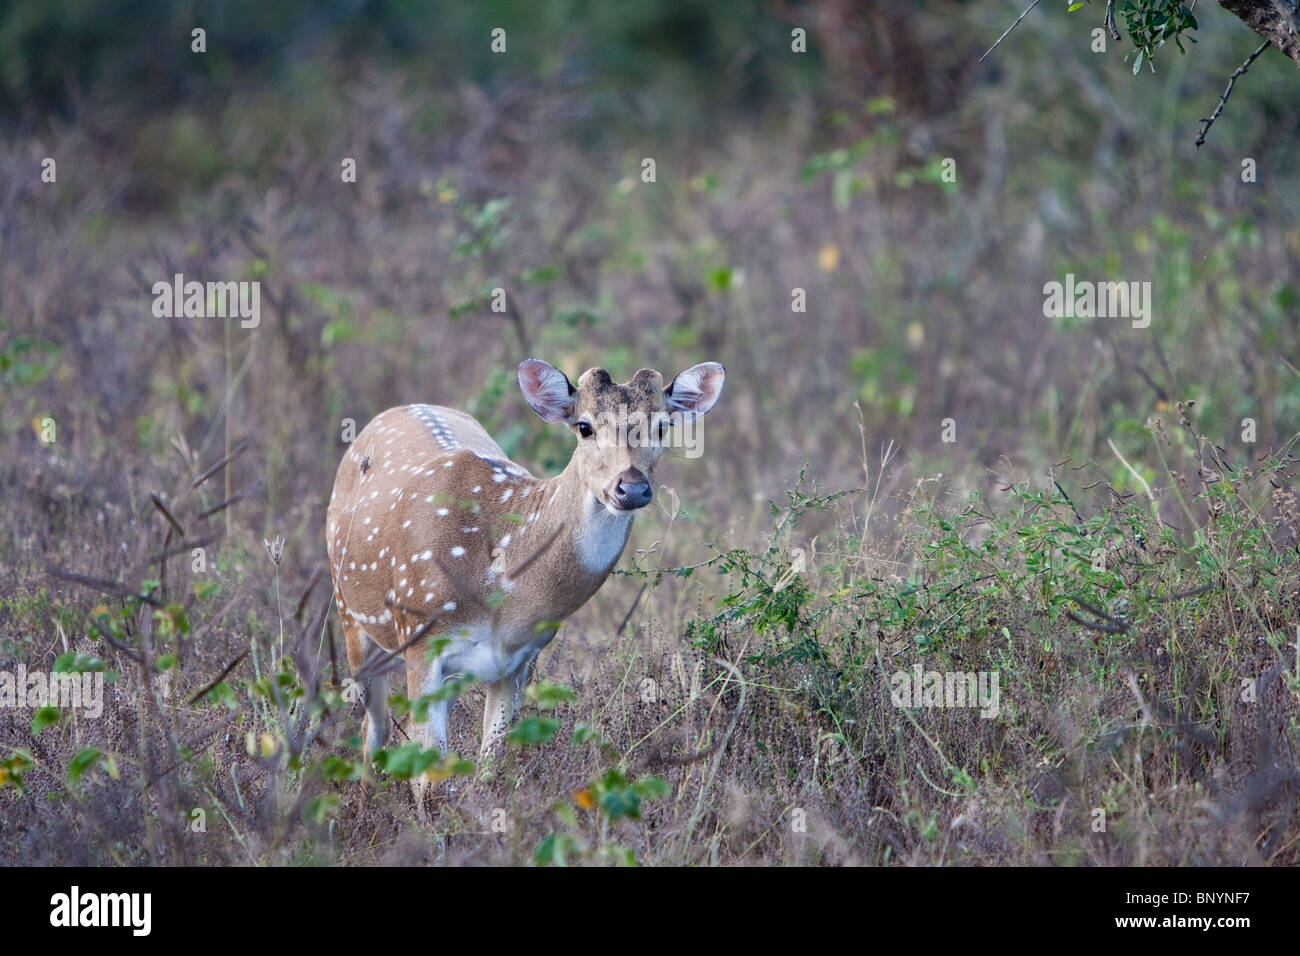 Spotted Deer, Cervus axis, Axishirsch, young deer in Yala National Park Sri Lanka Stock Photo